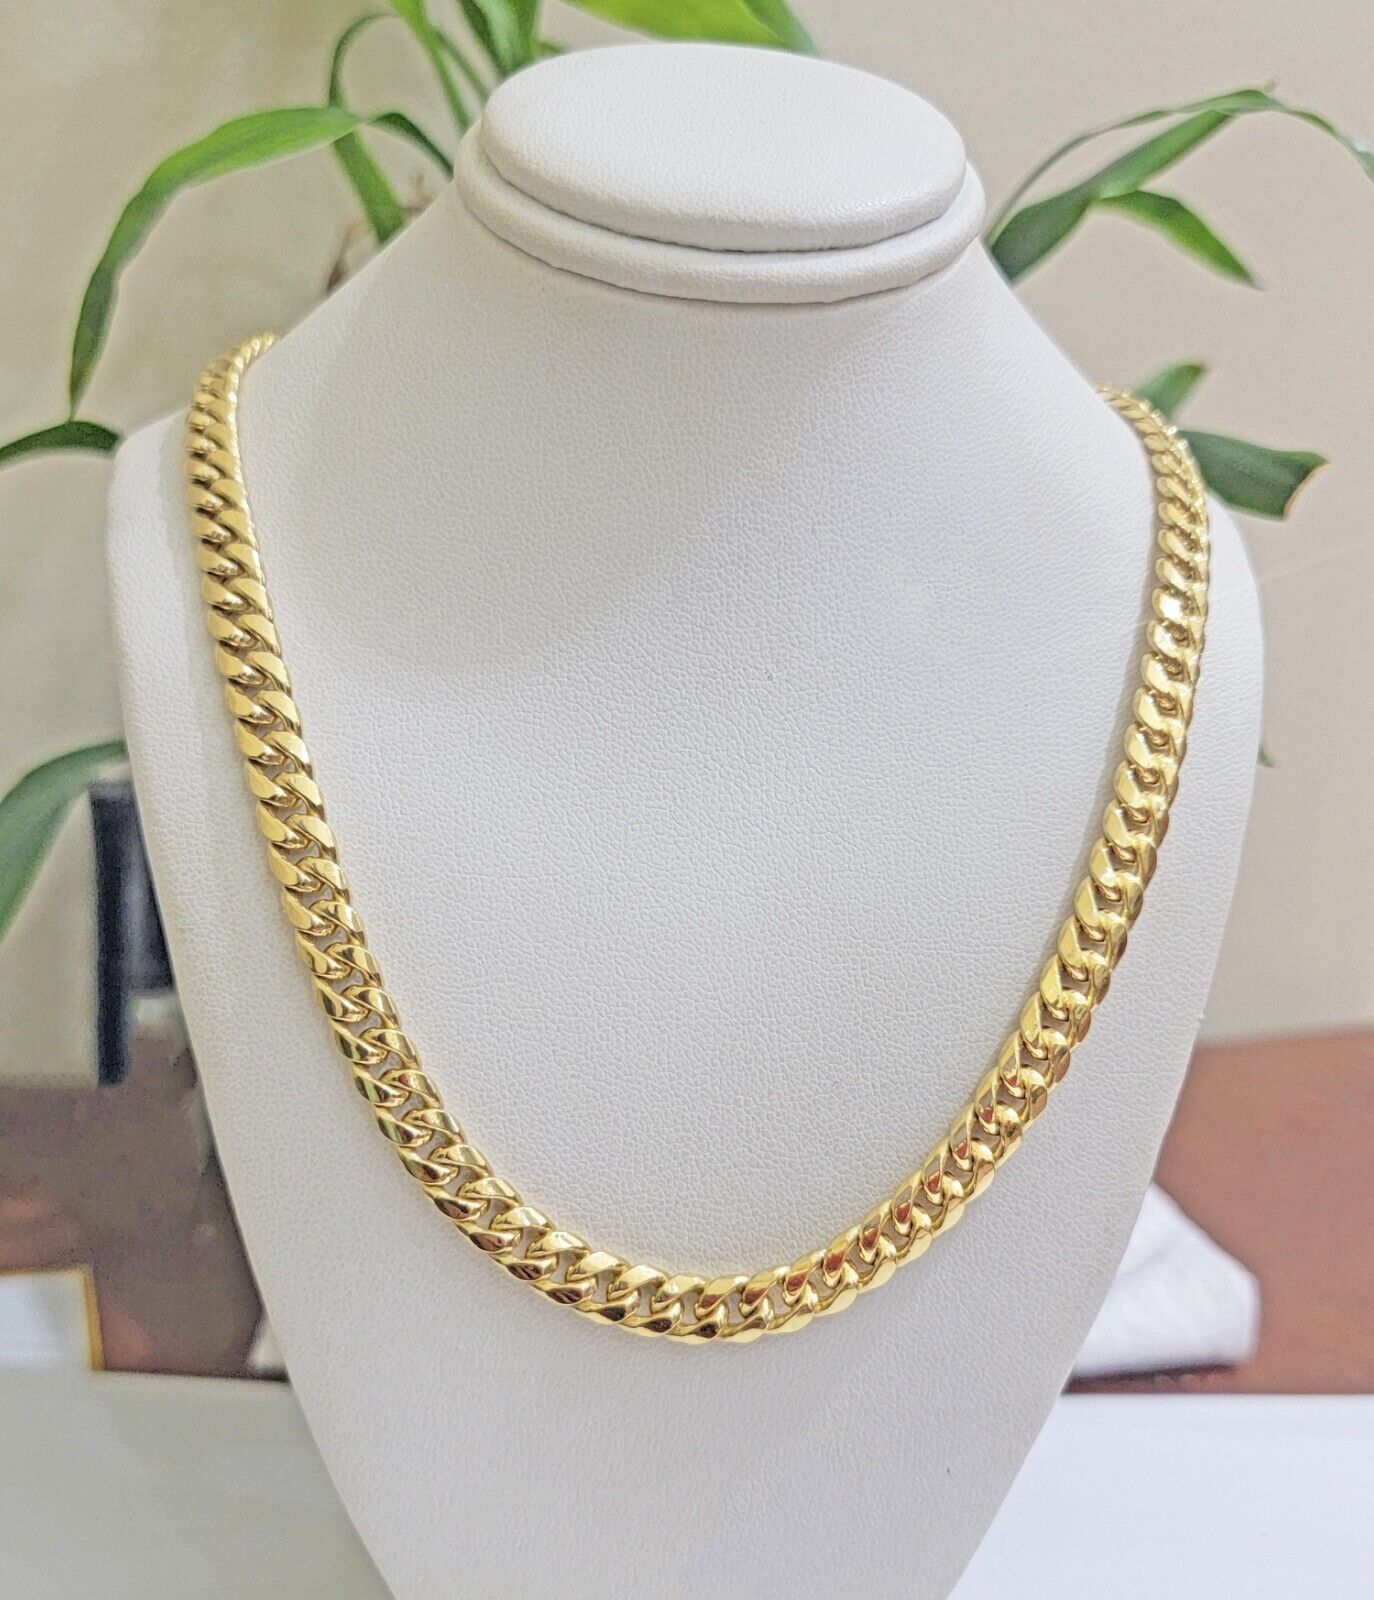 10k Gold Necklace 7mm 26 Inch Miami Cuban Link Chain REAL 10kt yellow Gold Men's